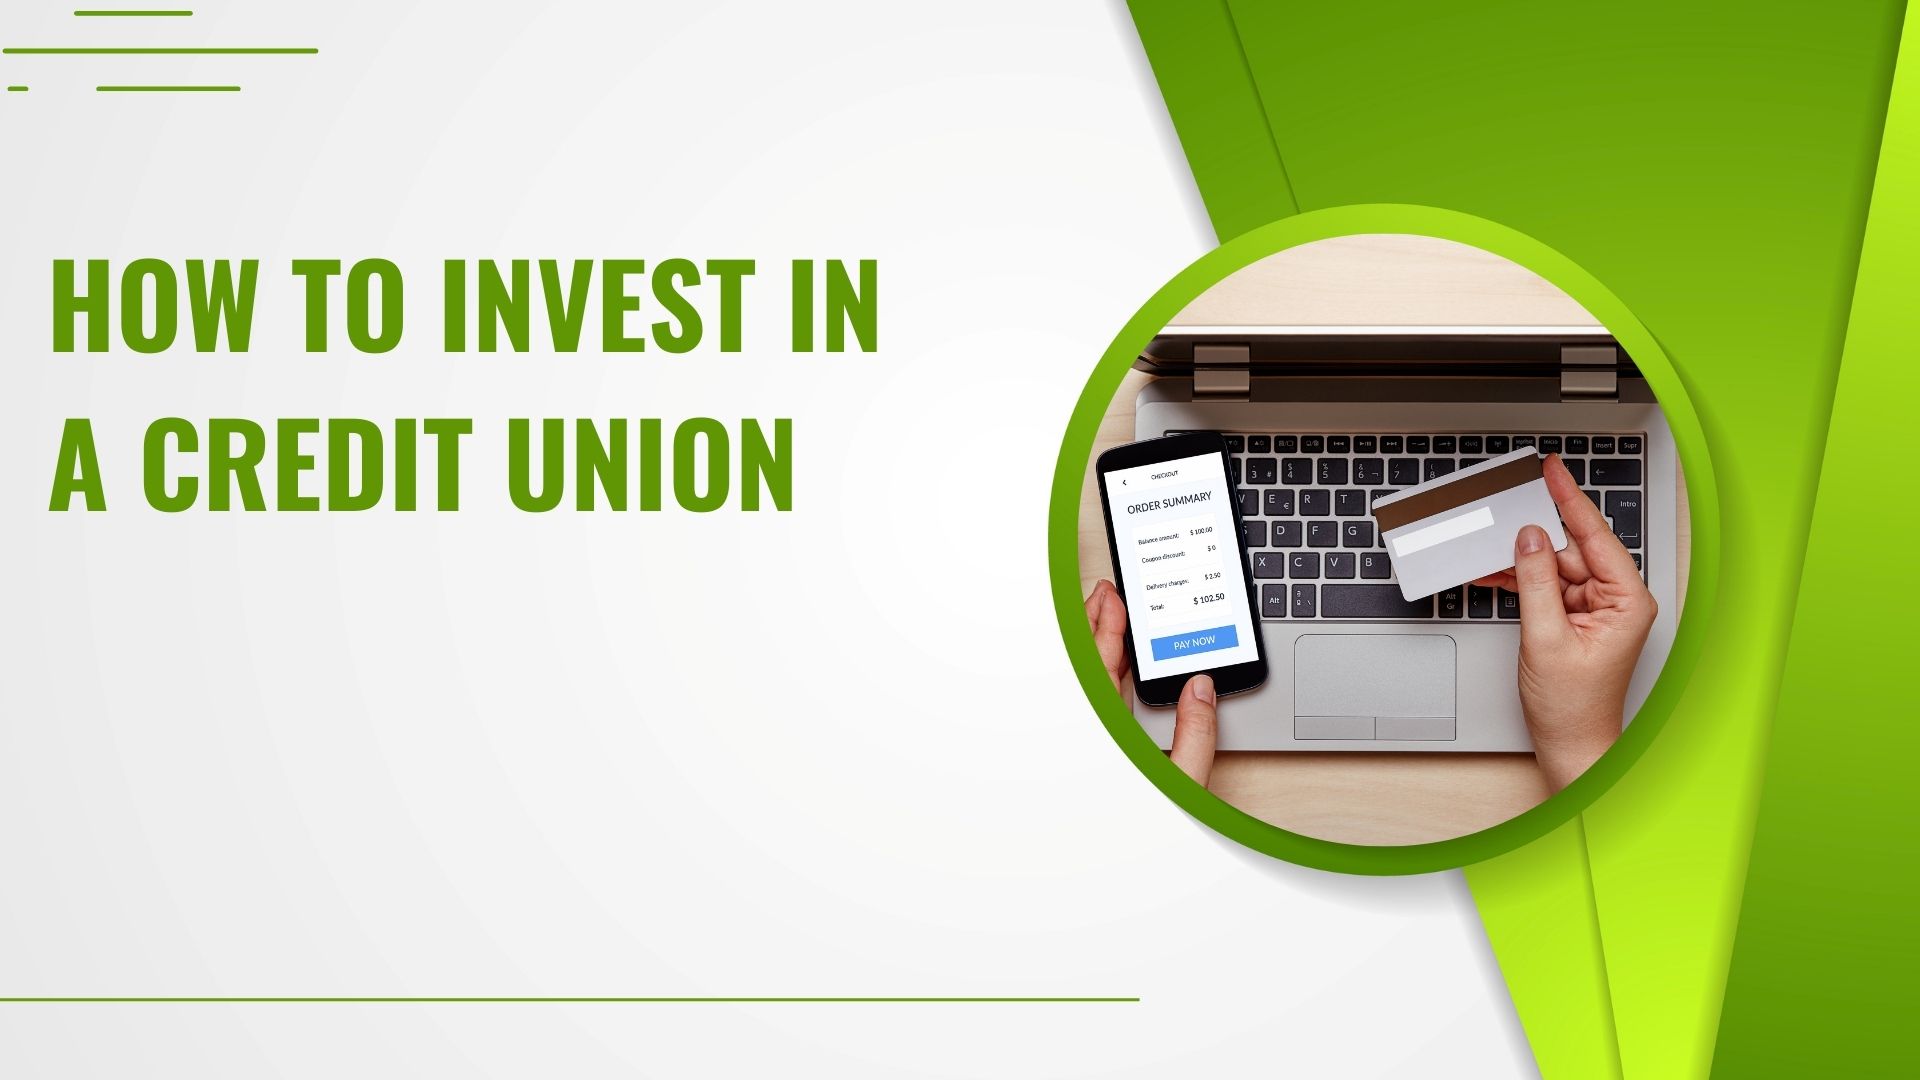 How to Invest in a Credit Union